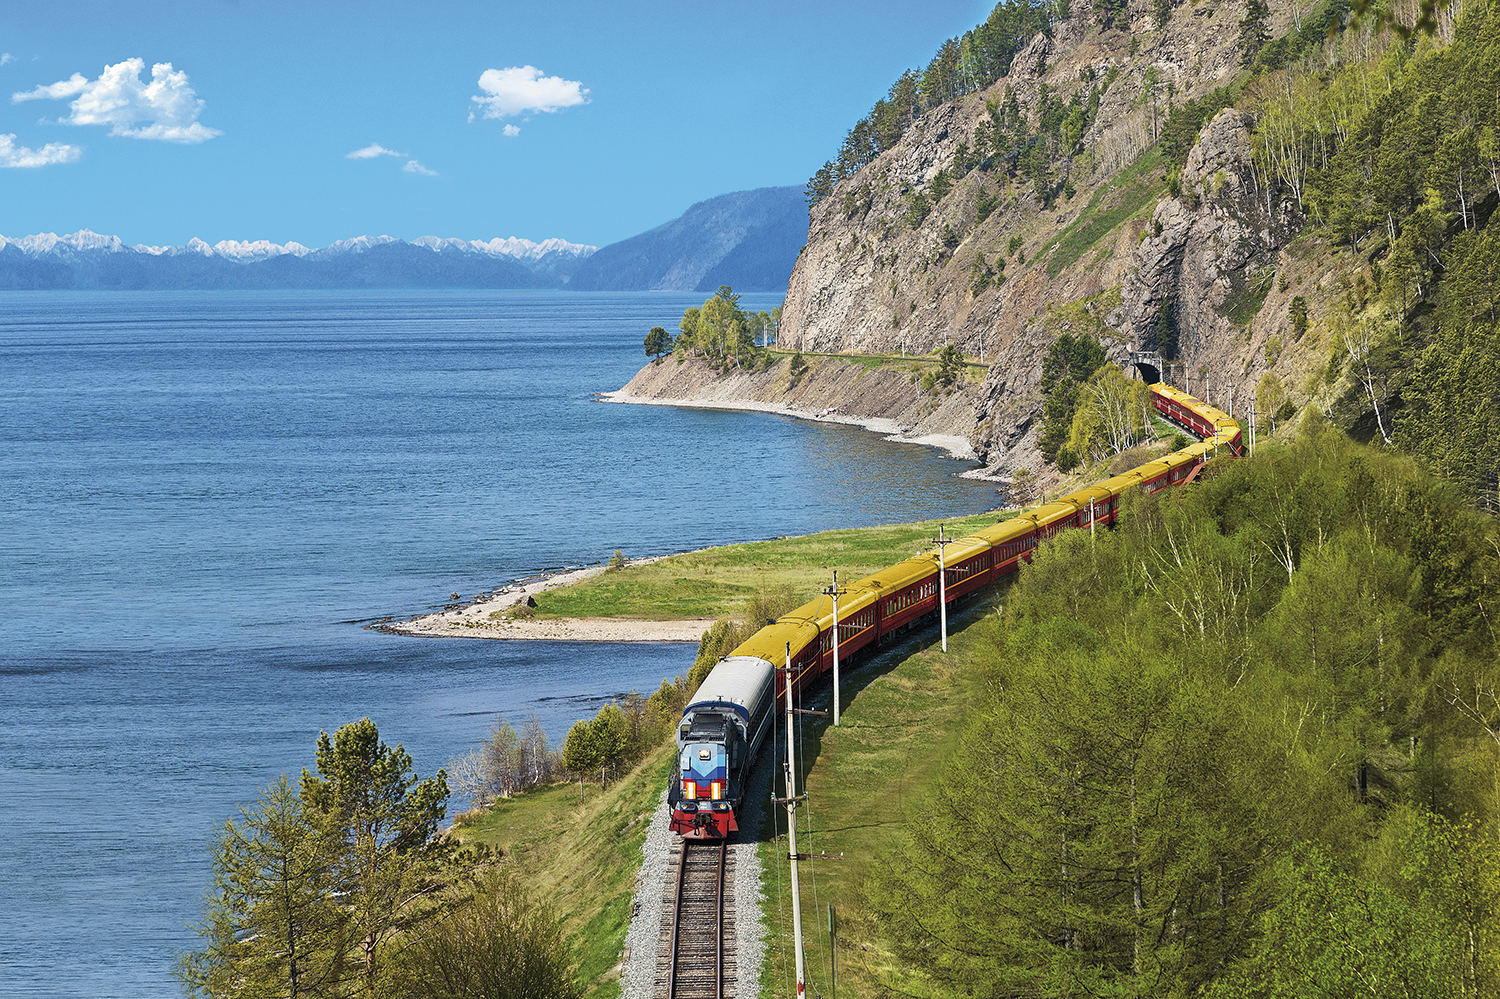 Lake Baikal. Blue lake on the left, a train running on the hillside on the right. 